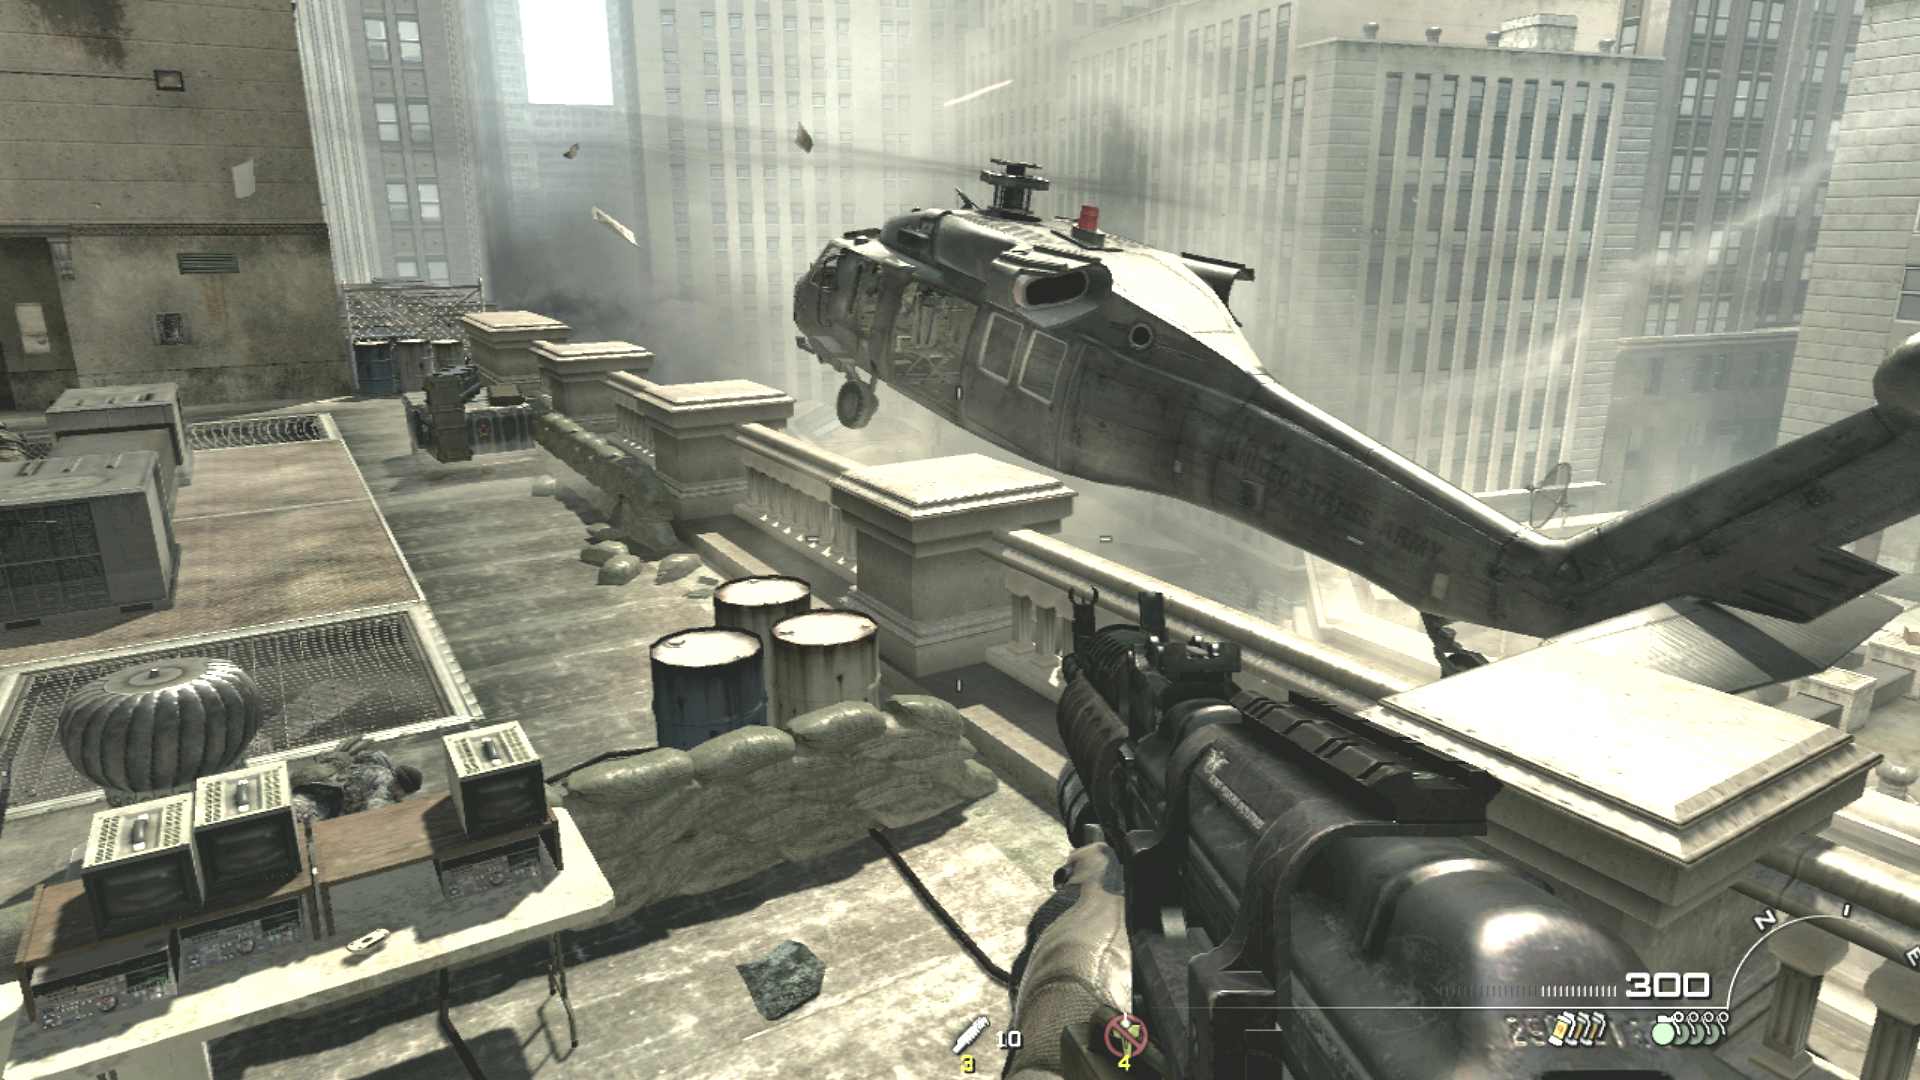 Call of Duty Modern Warfare 3 highly compressed download for pc 5.48GB